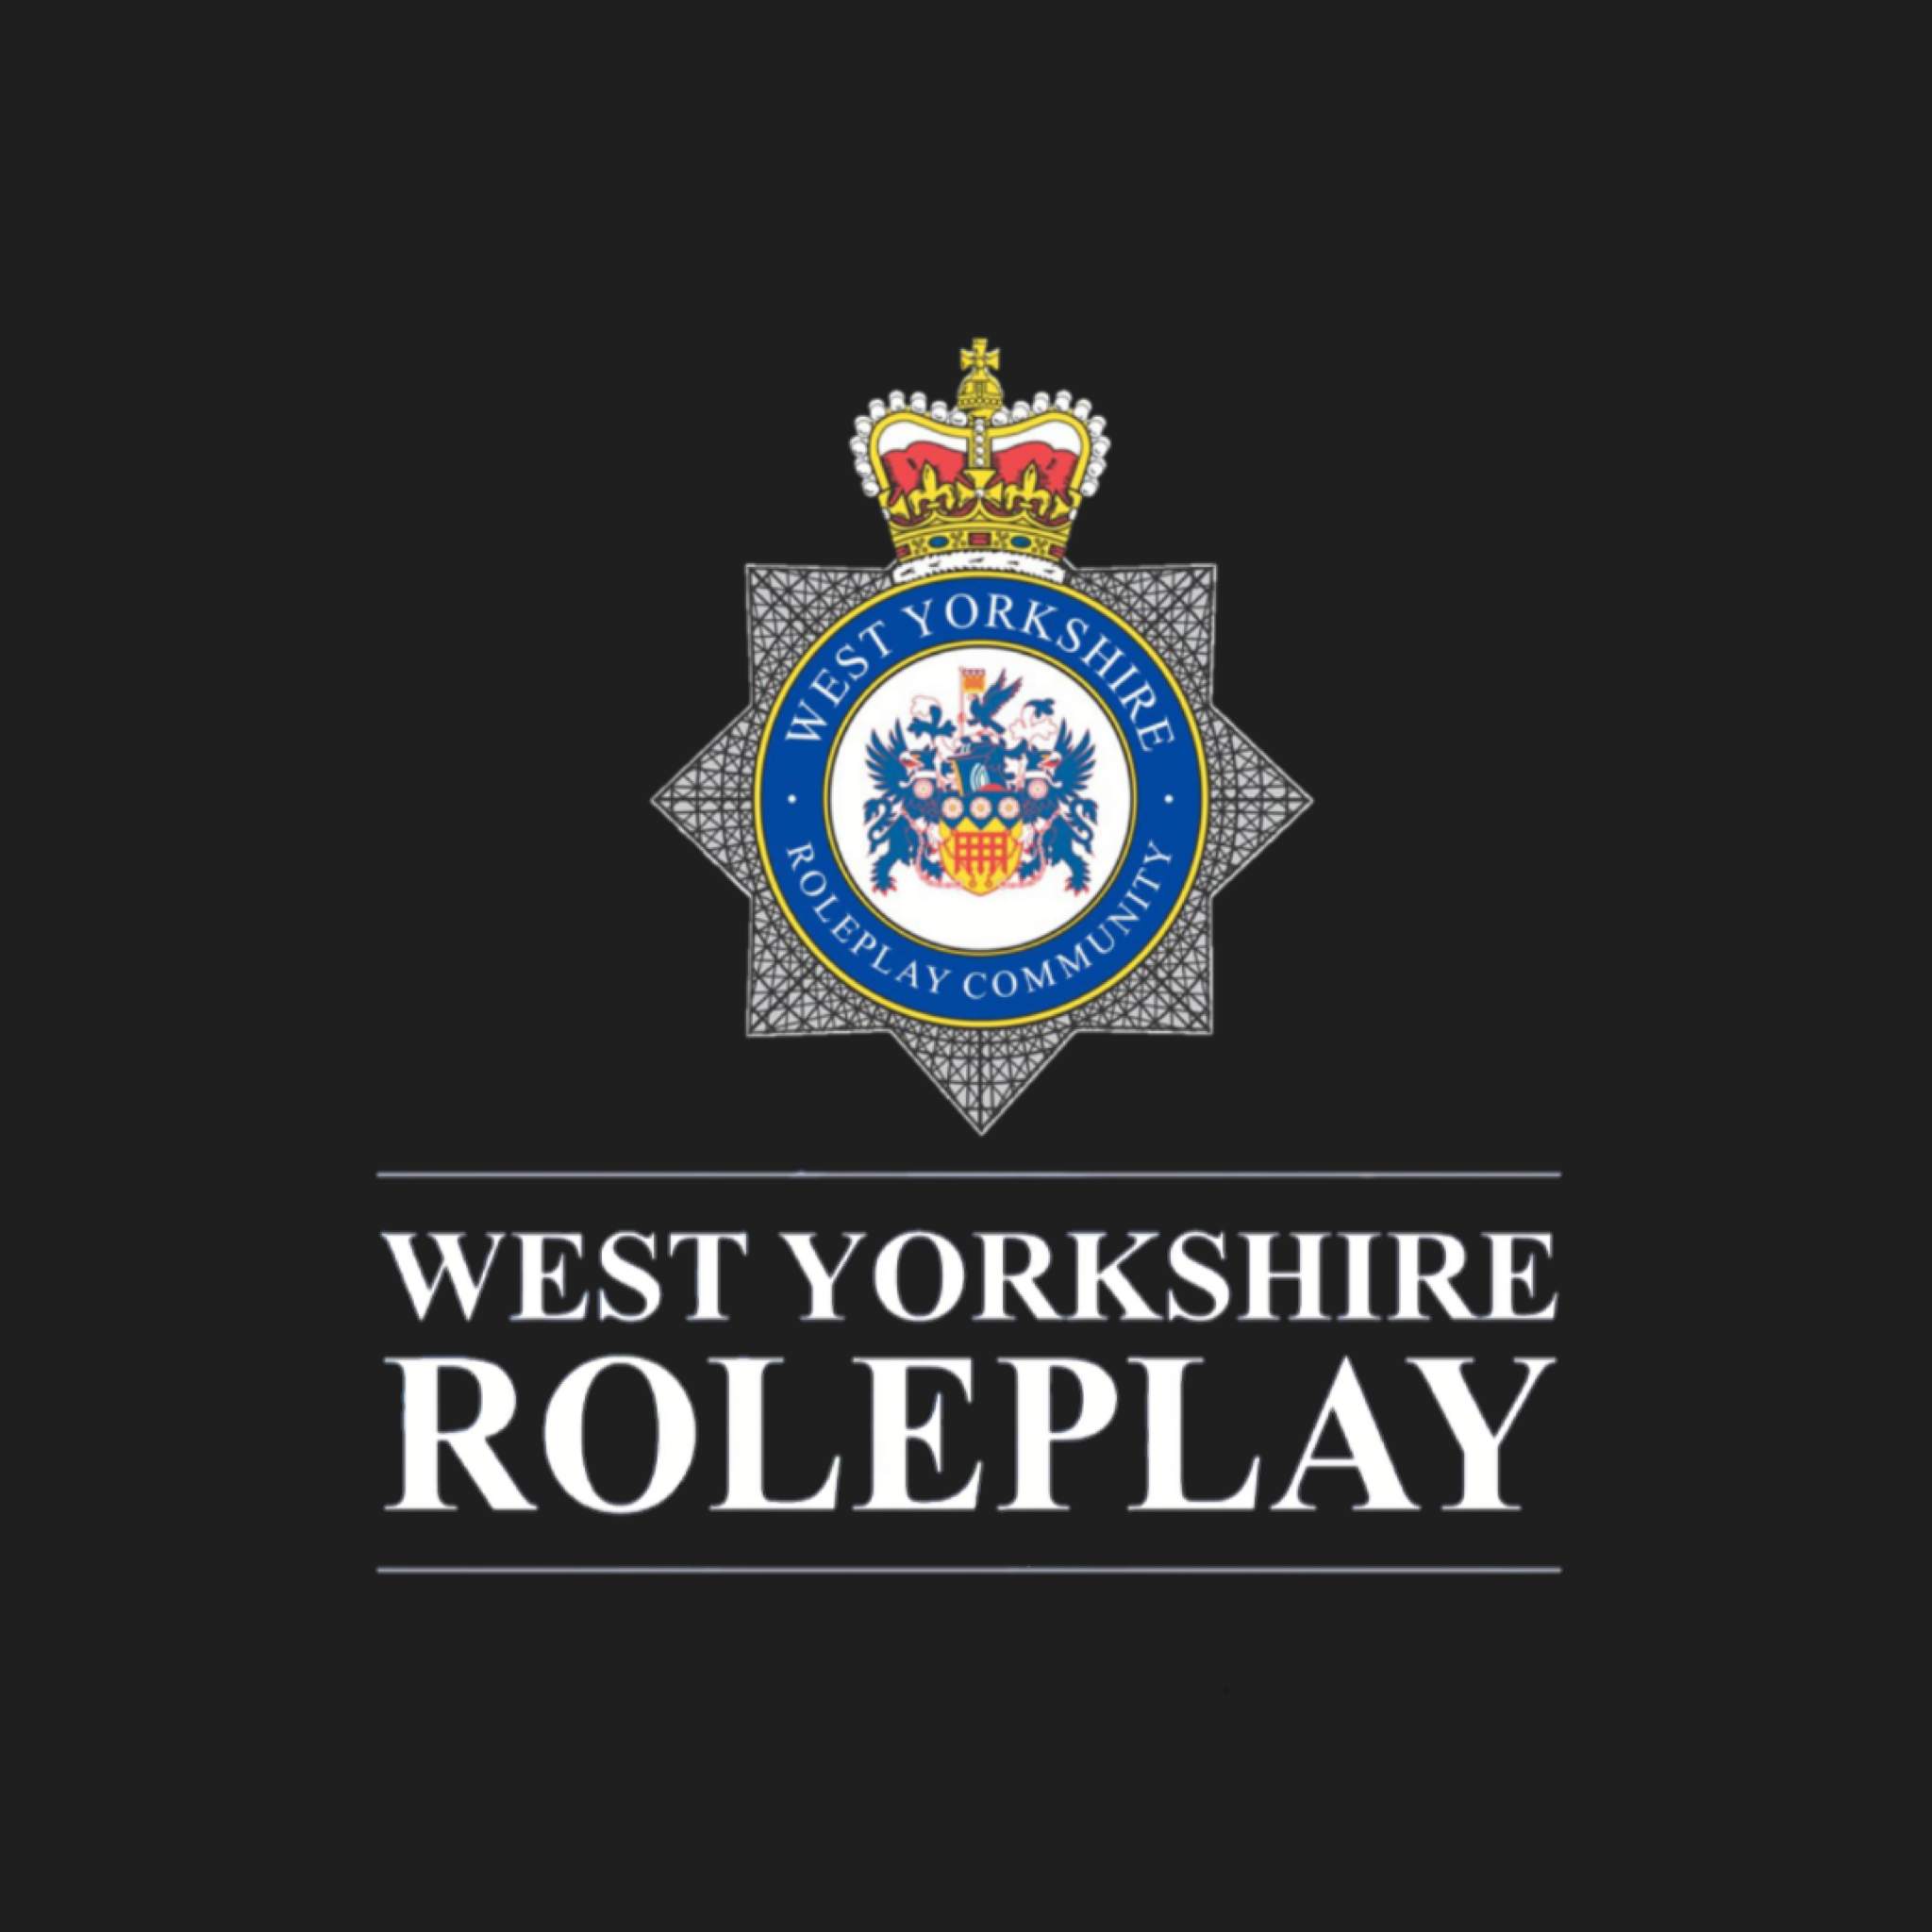 West Yorkshire Roleplay